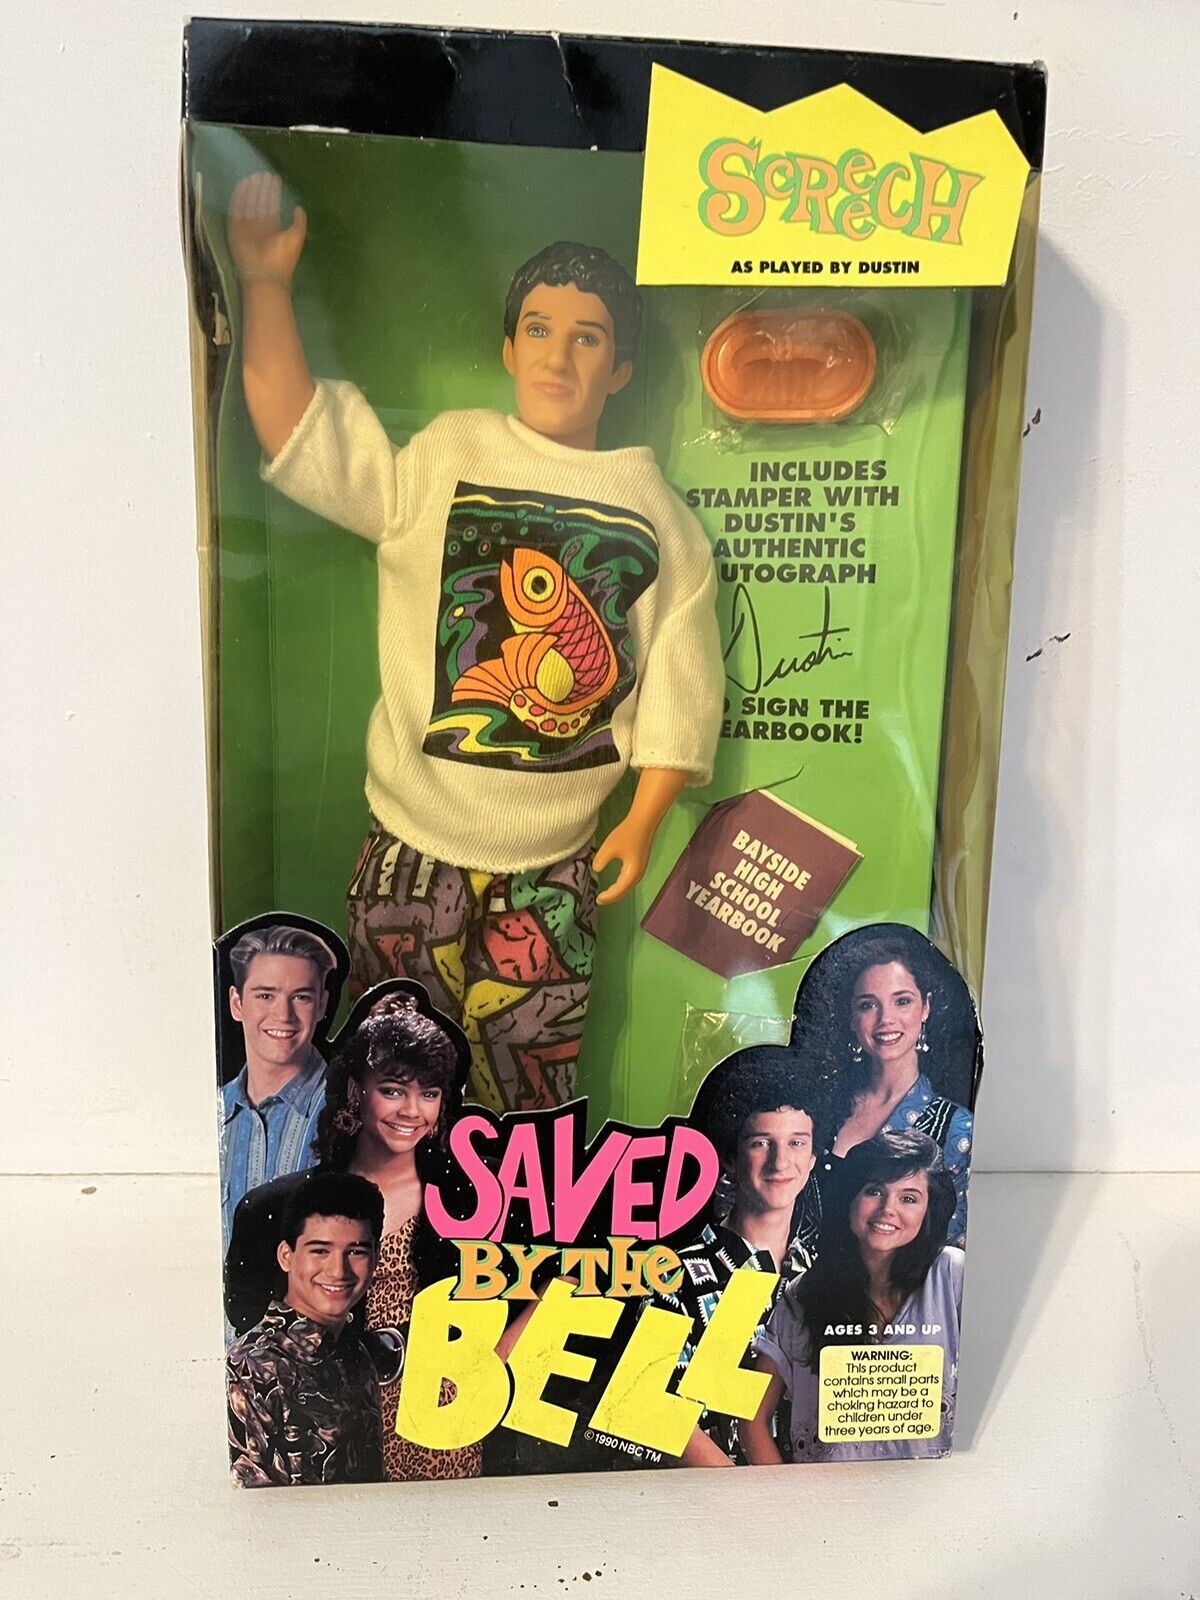 Saved by the Bell Vintage Screech Doll 1992 Tiger Toys Dustin Diamond Sealed Box